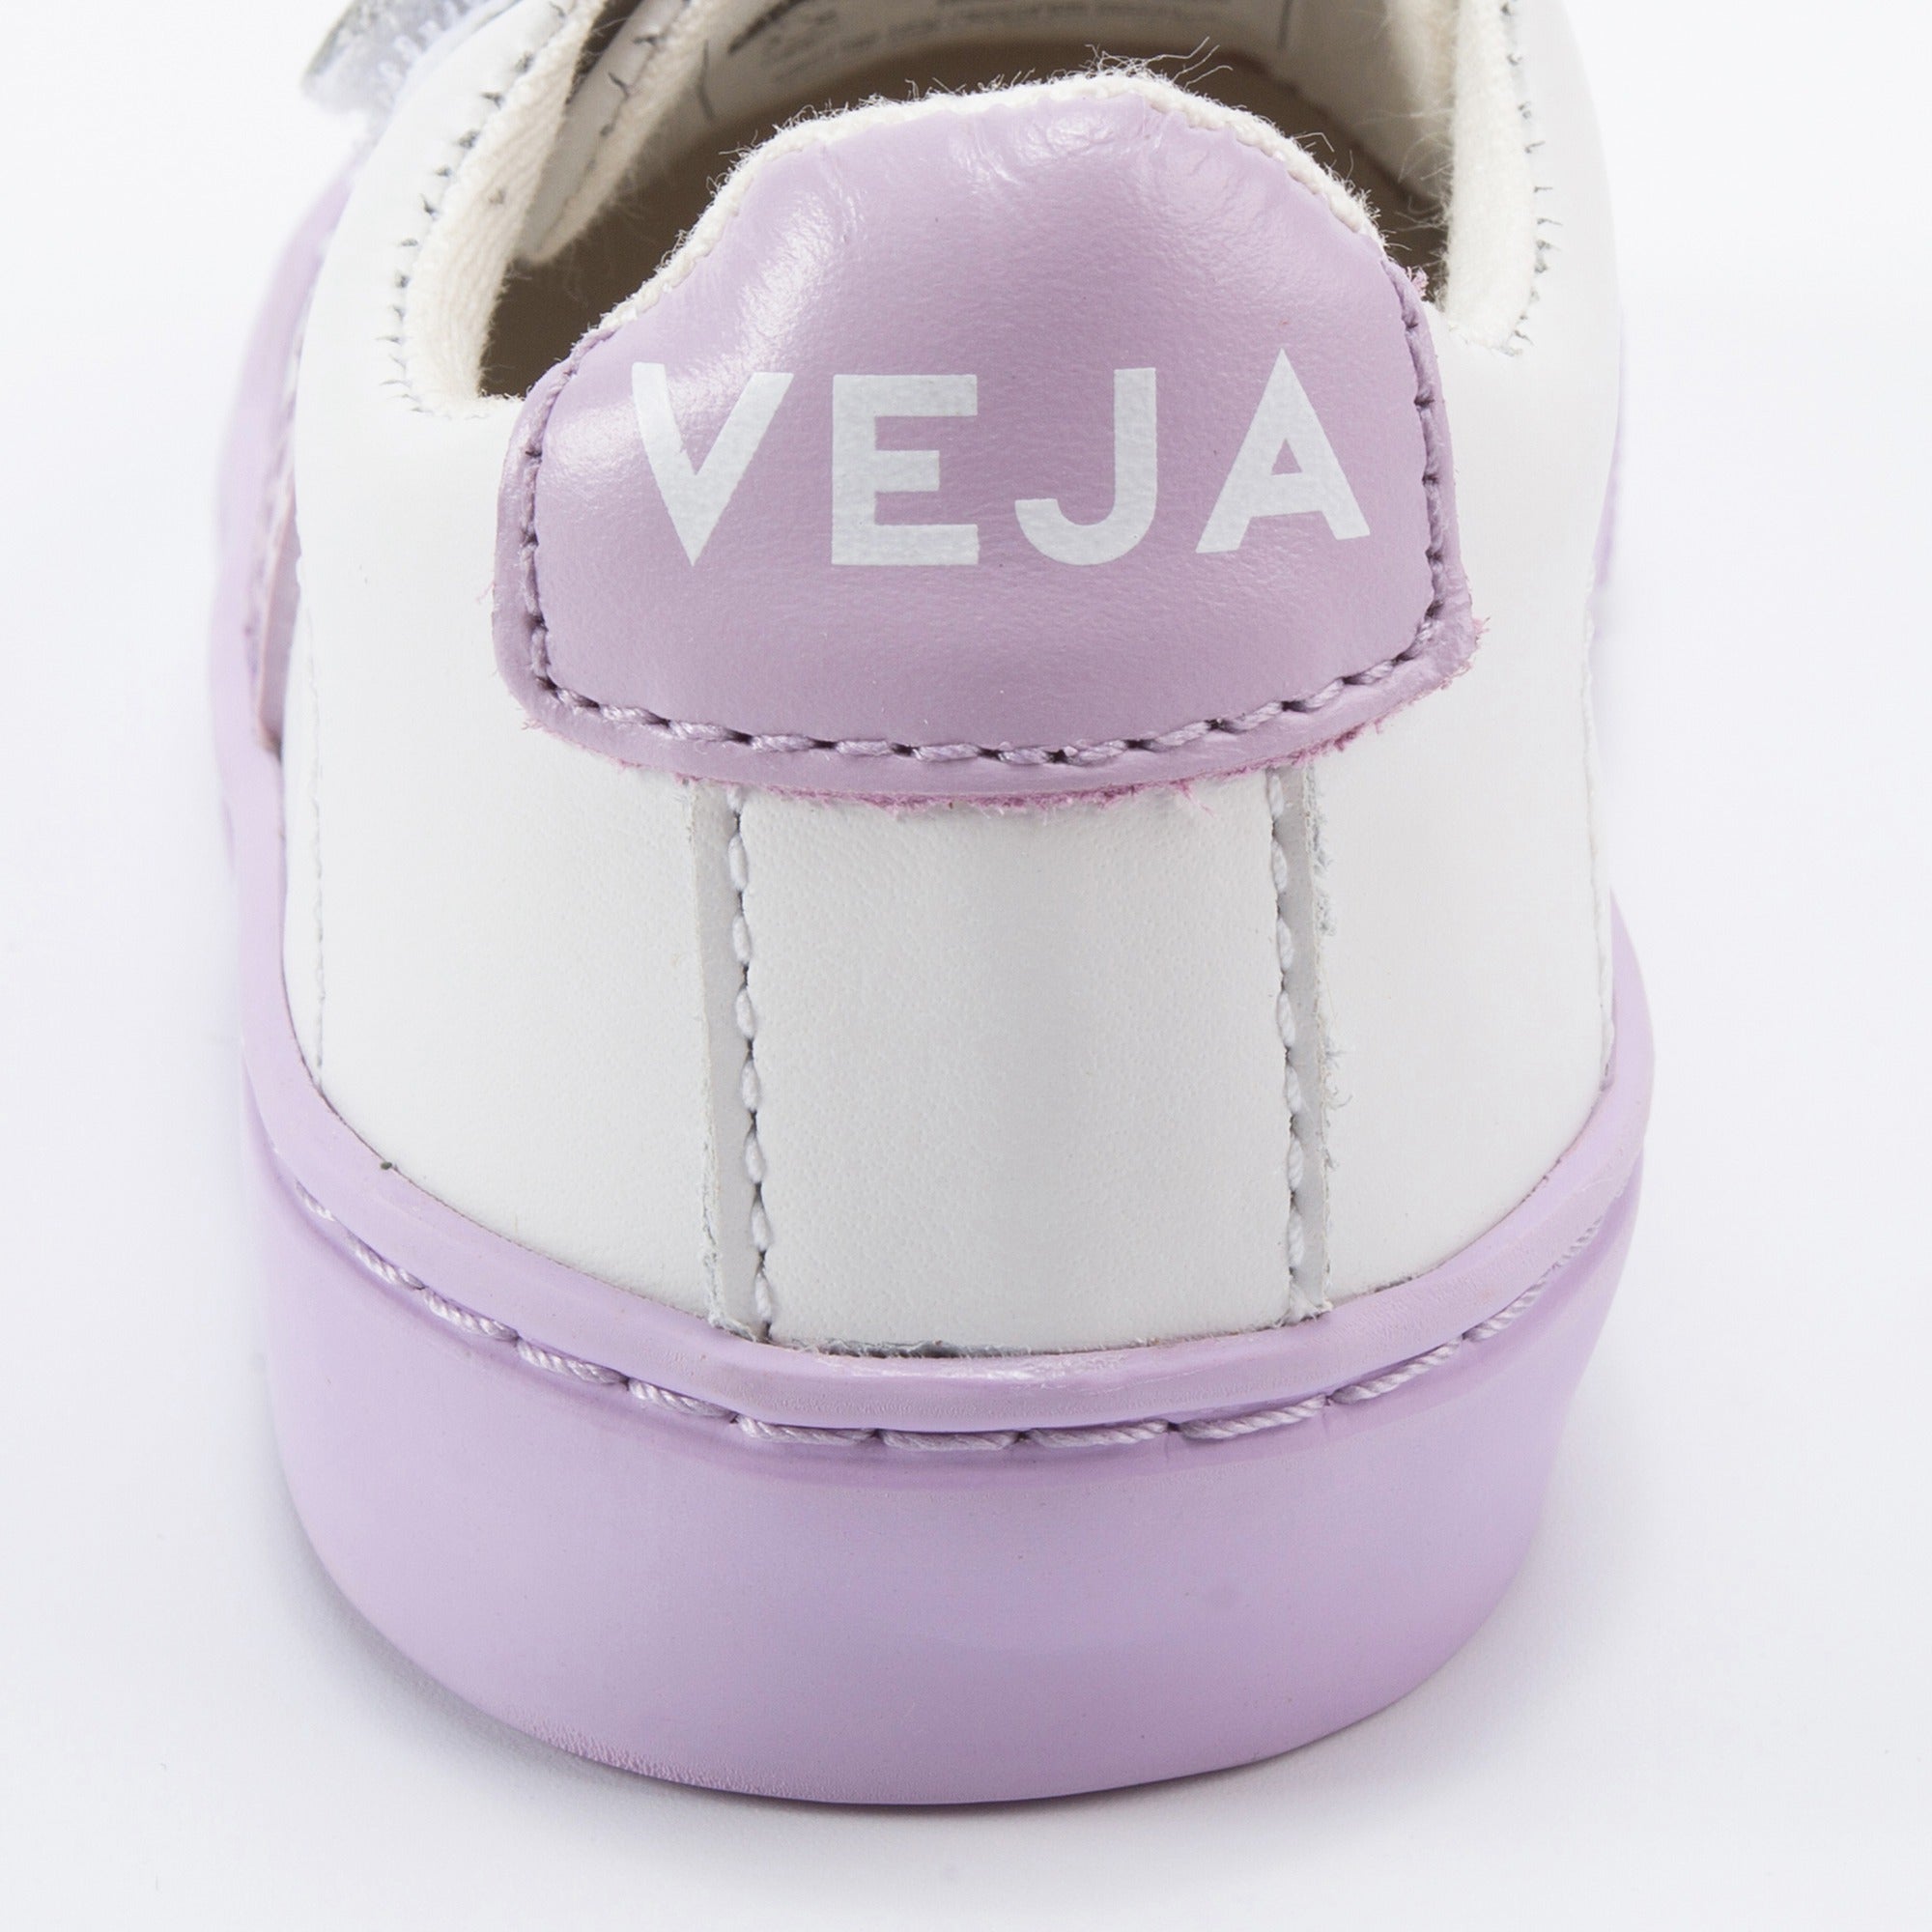 Girls Black Leather Velcro With Purple "V" Shoes